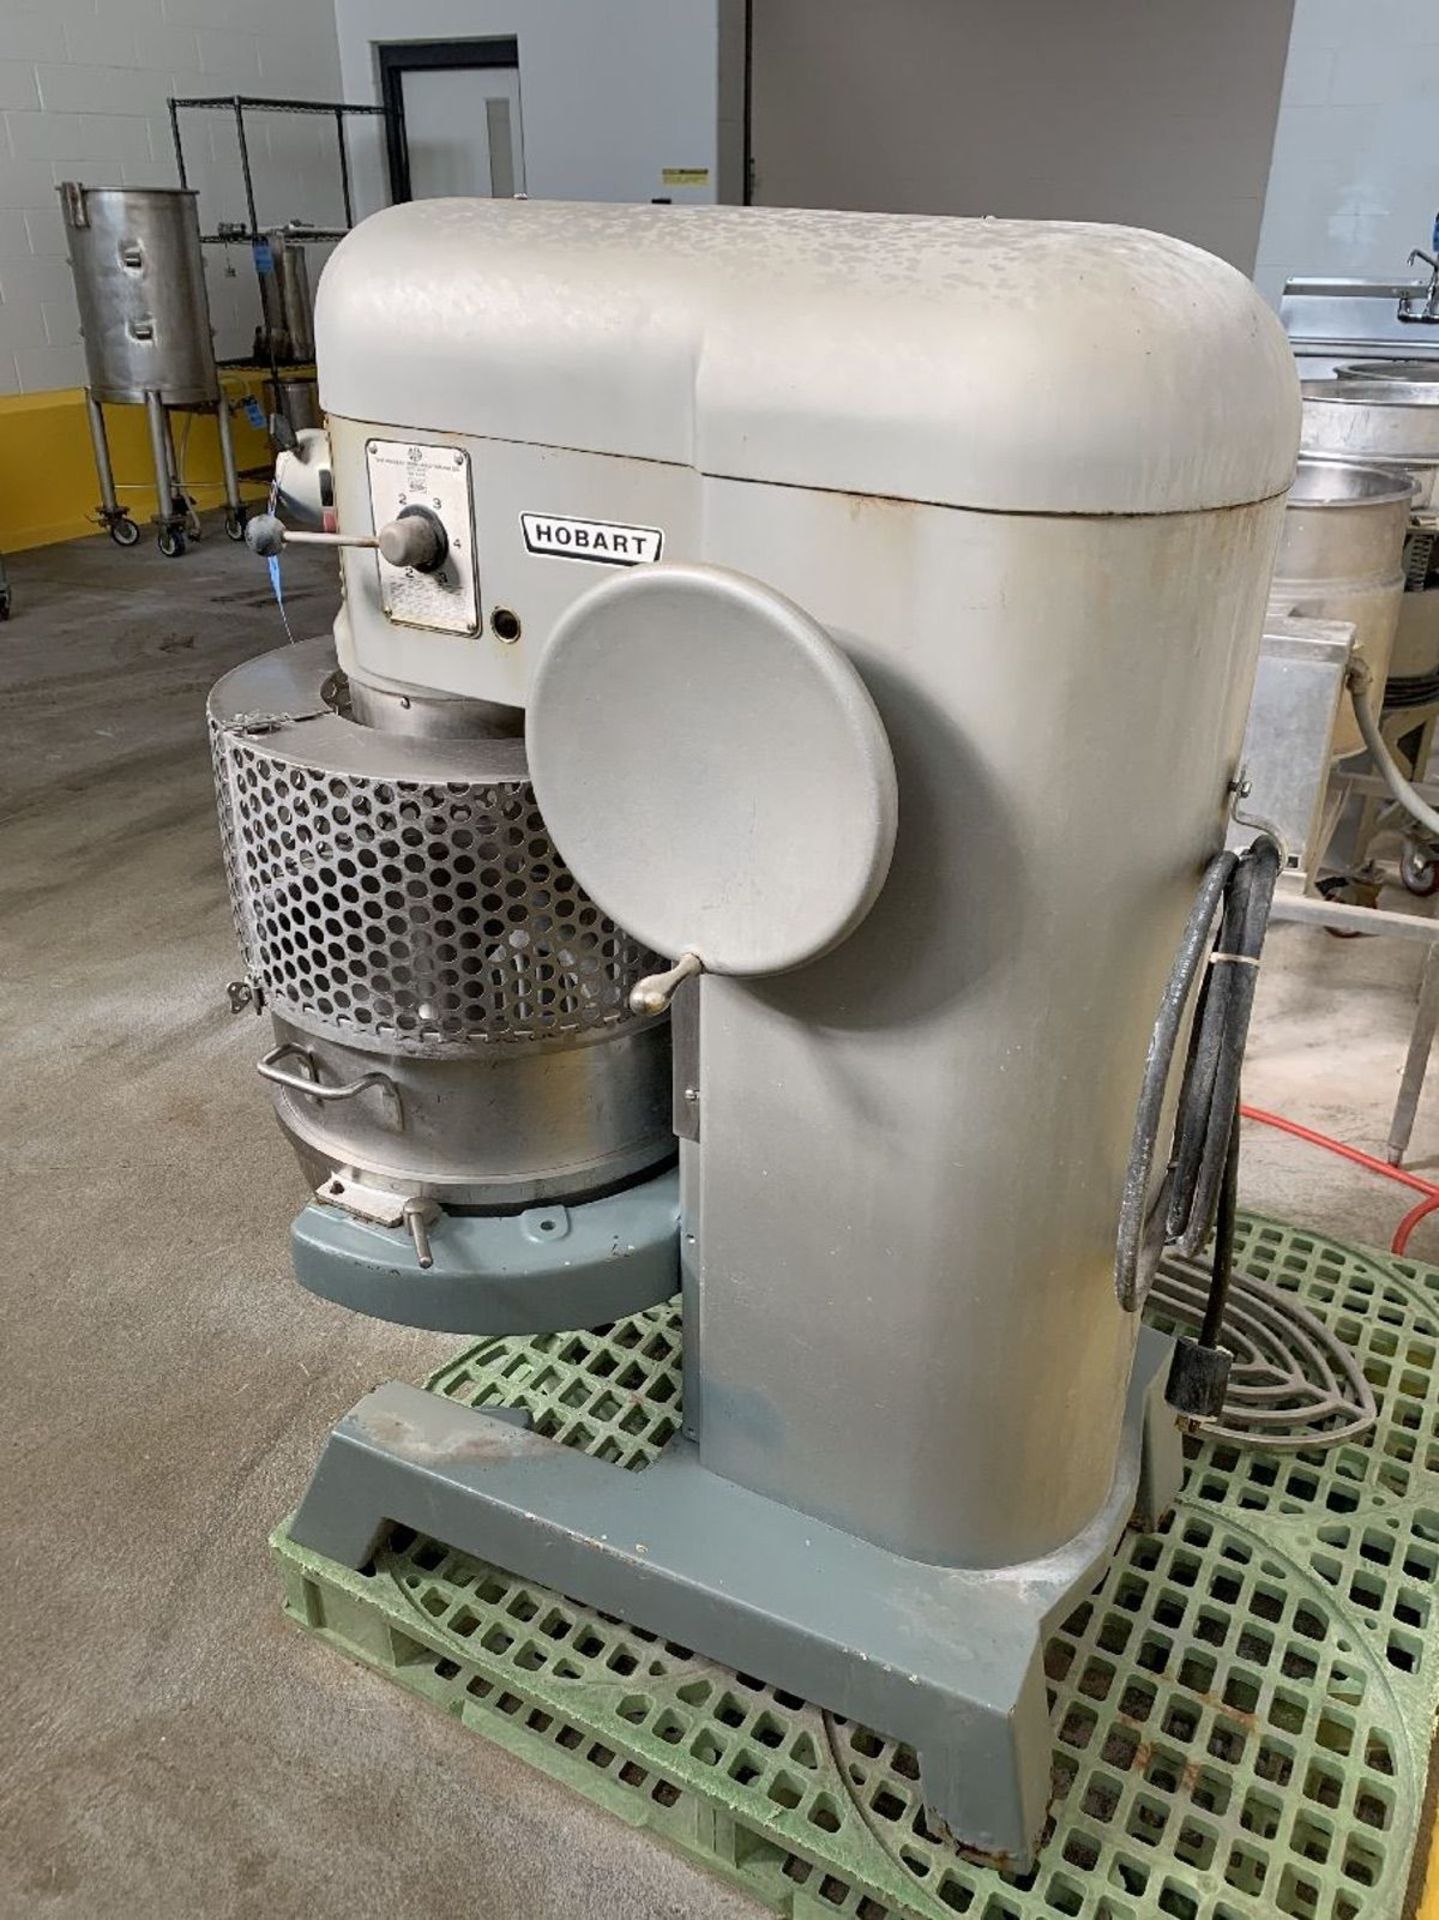 HOBART 80 QUART MIXER MODEL L-800; S/N 11-043-672, 1.5 HP, 60 HZ, 3-PHASE WITH (3) | Rig Fee: $300 - Image 3 of 7